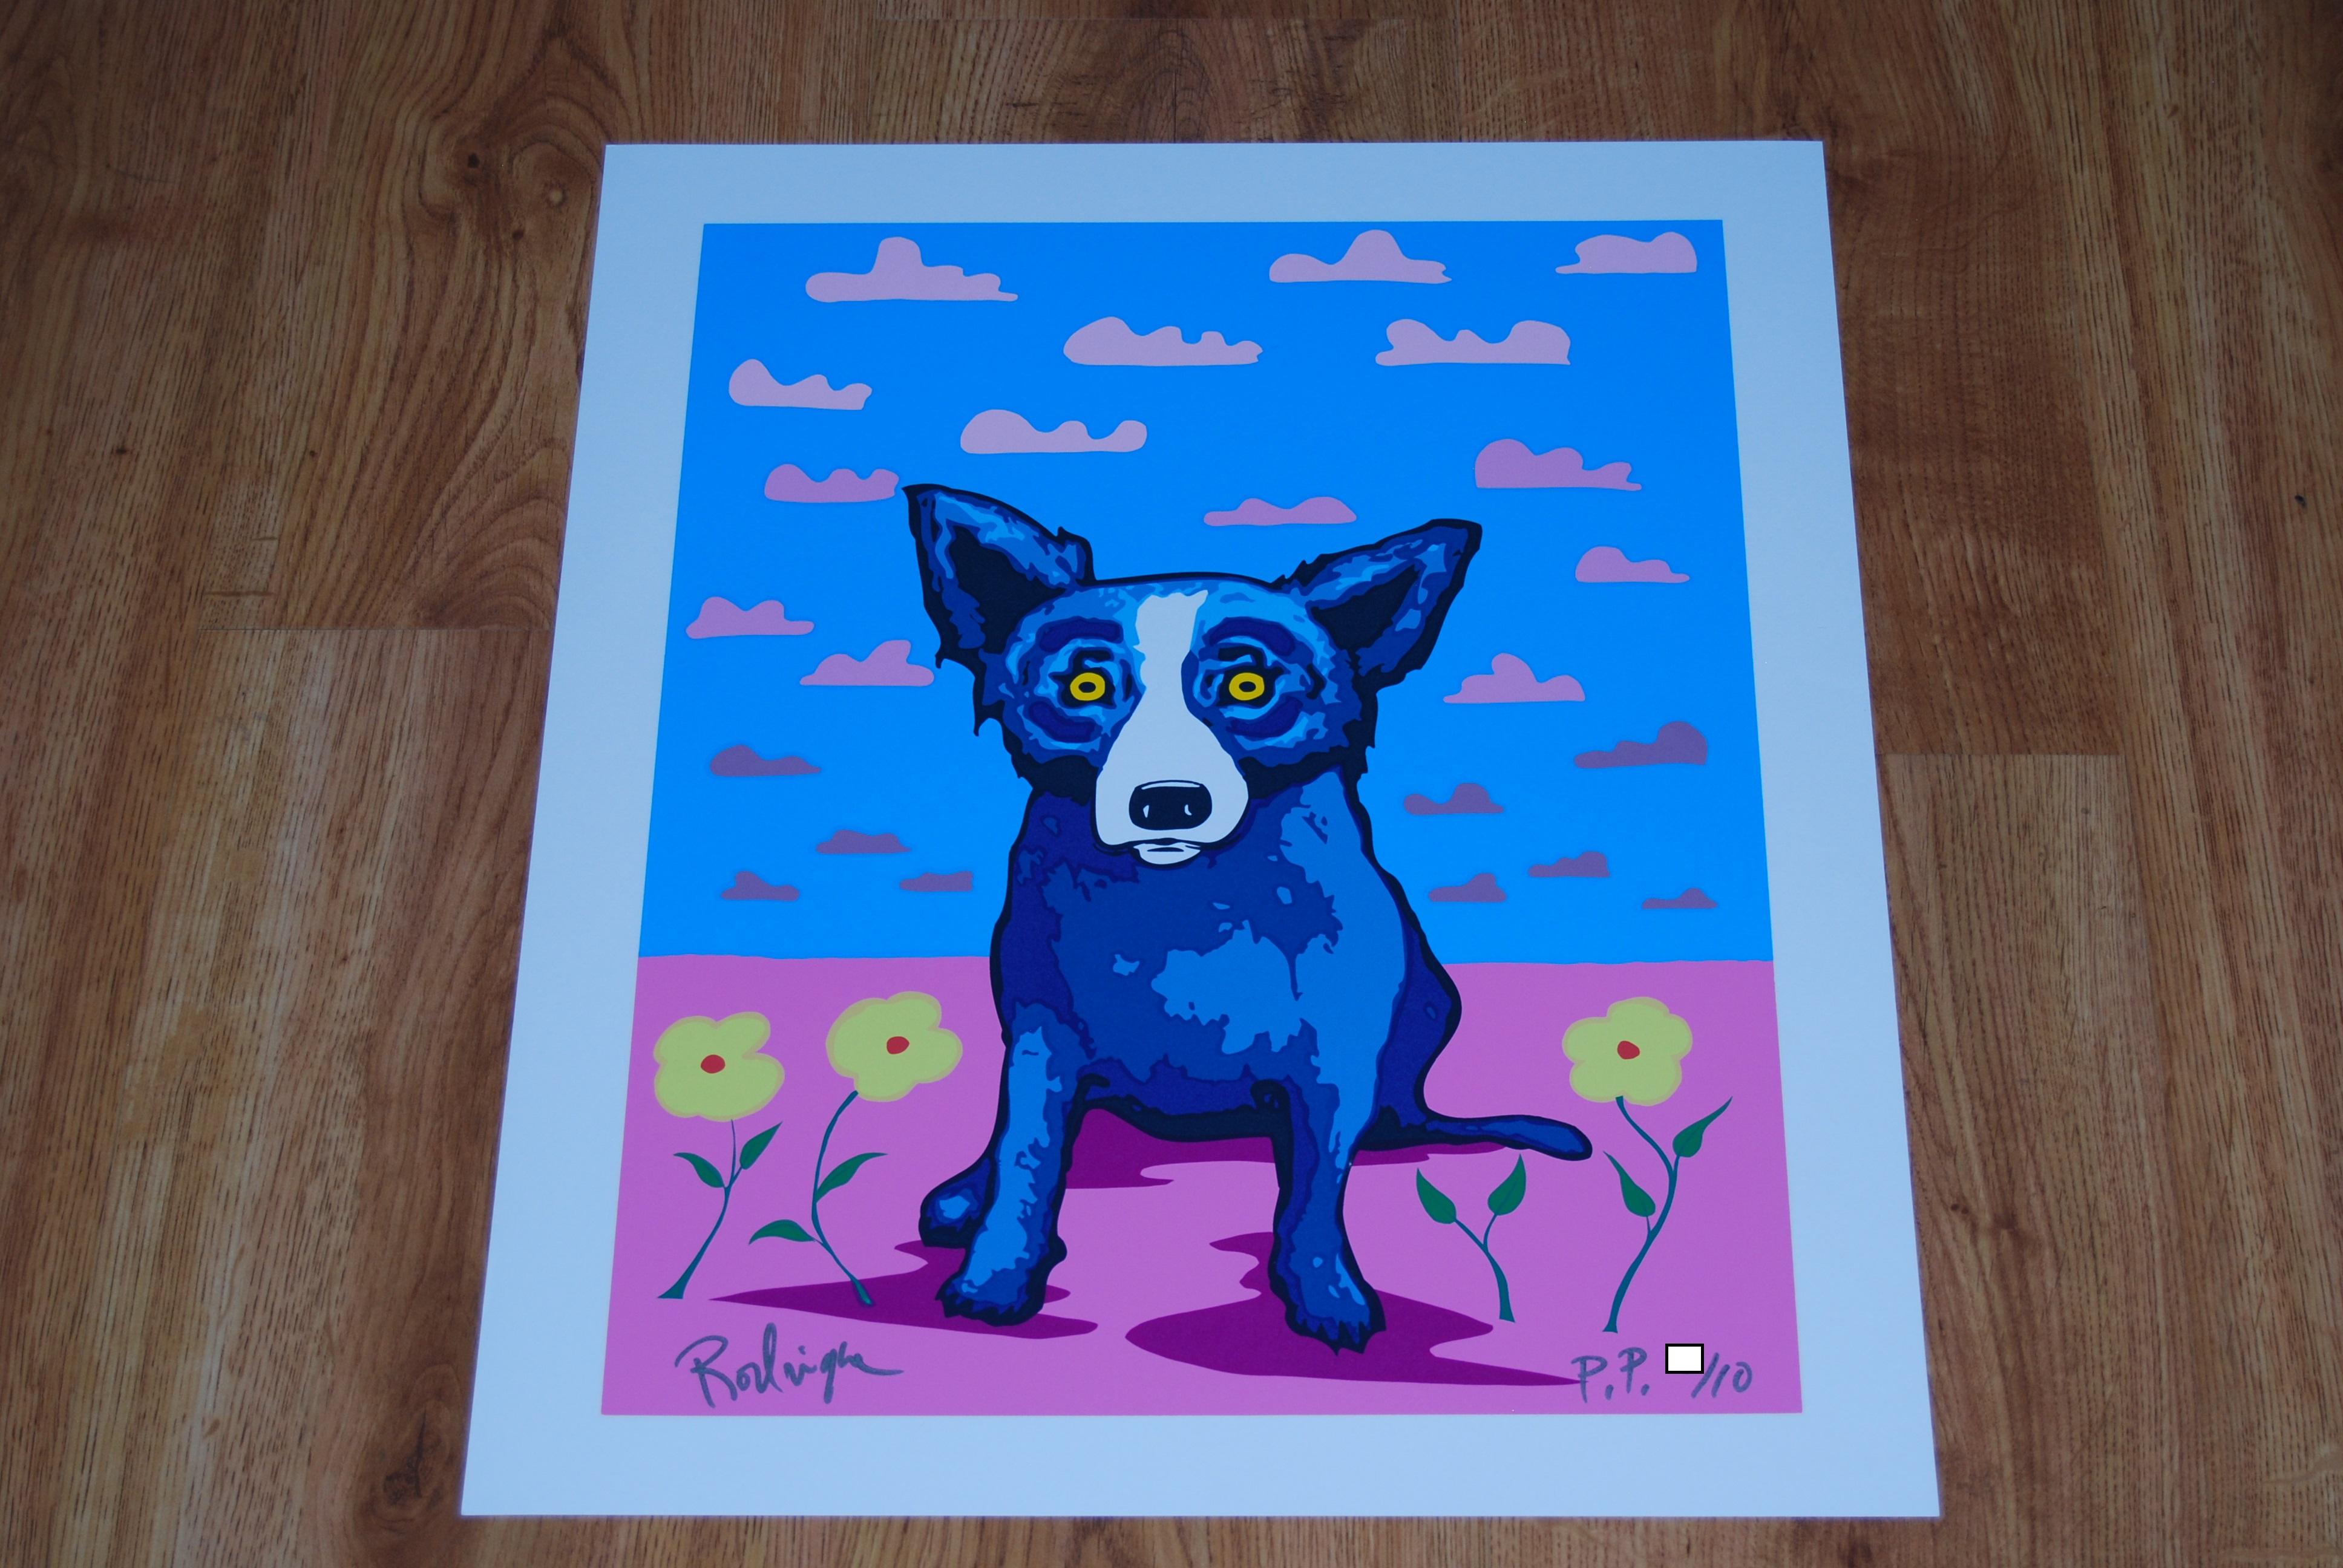 Artist:  George Rodrigue
Title:  Blue Dog “You Make My Landscape Happy”
Medium:  Silkscreen	
Date:  2000
Edition:  Printers Proof
Dimensions:  23.25” X 28.75”
Description:  Signed & Unframed
Condition:  Excellent 
